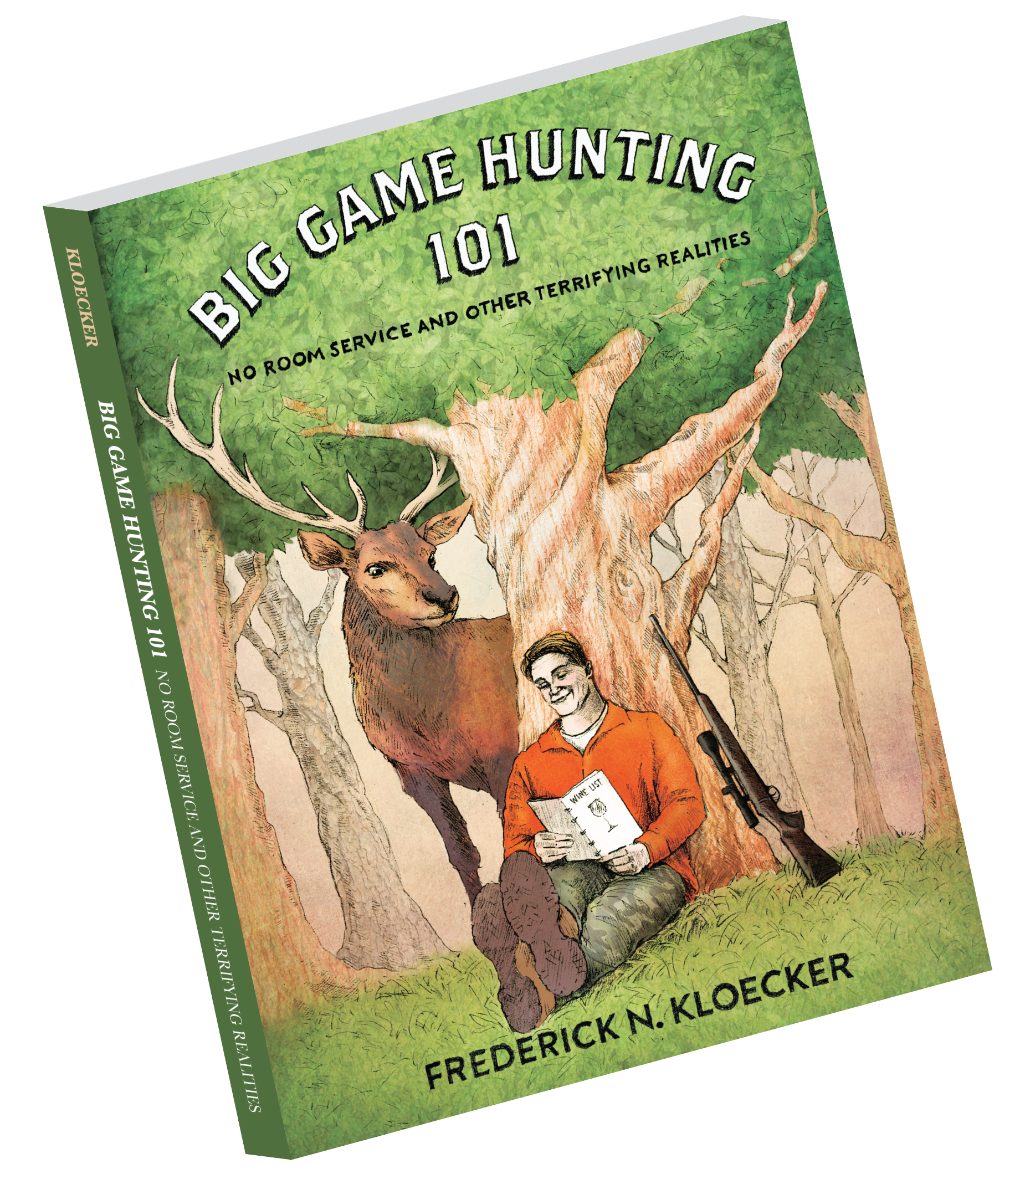 OUTDOOR HUMORIST TO LAUNCH HIS FIRST BOOK AT NWTF CONVENTION AND SPORT SHOW